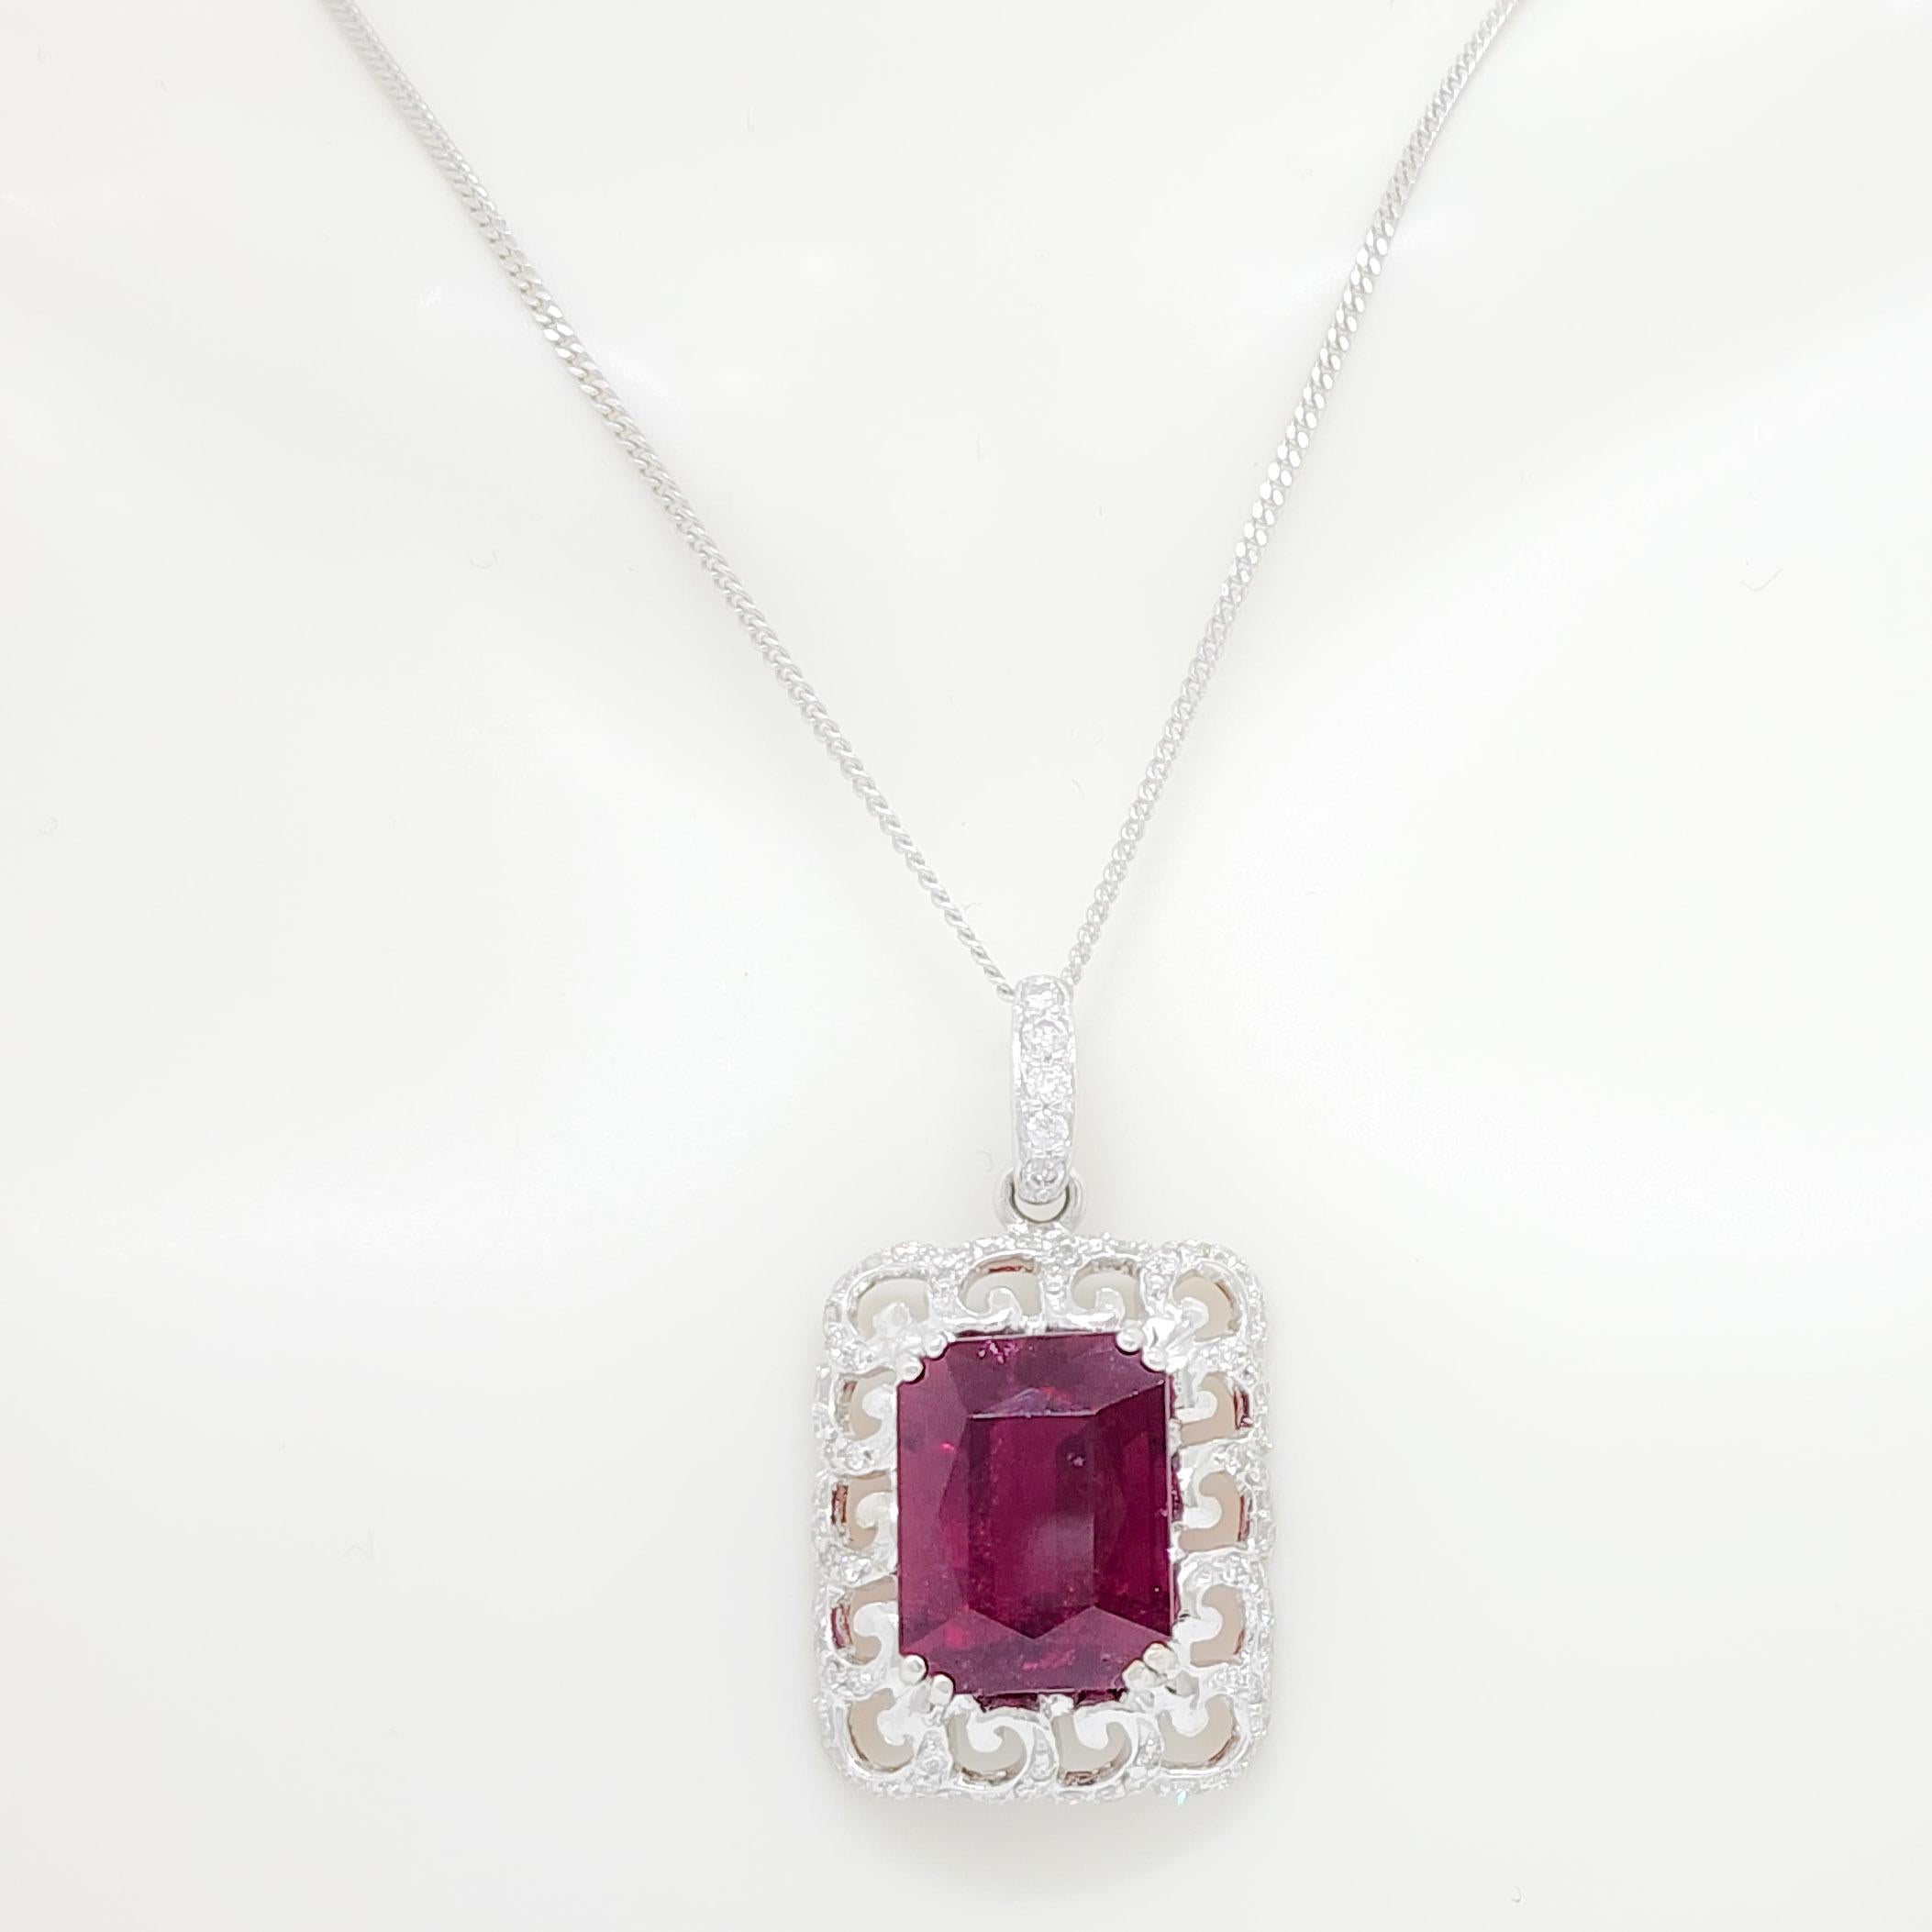 Rubellite Emerald Cut and White Diamond Pendant Necklace in 18k In New Condition For Sale In Los Angeles, CA